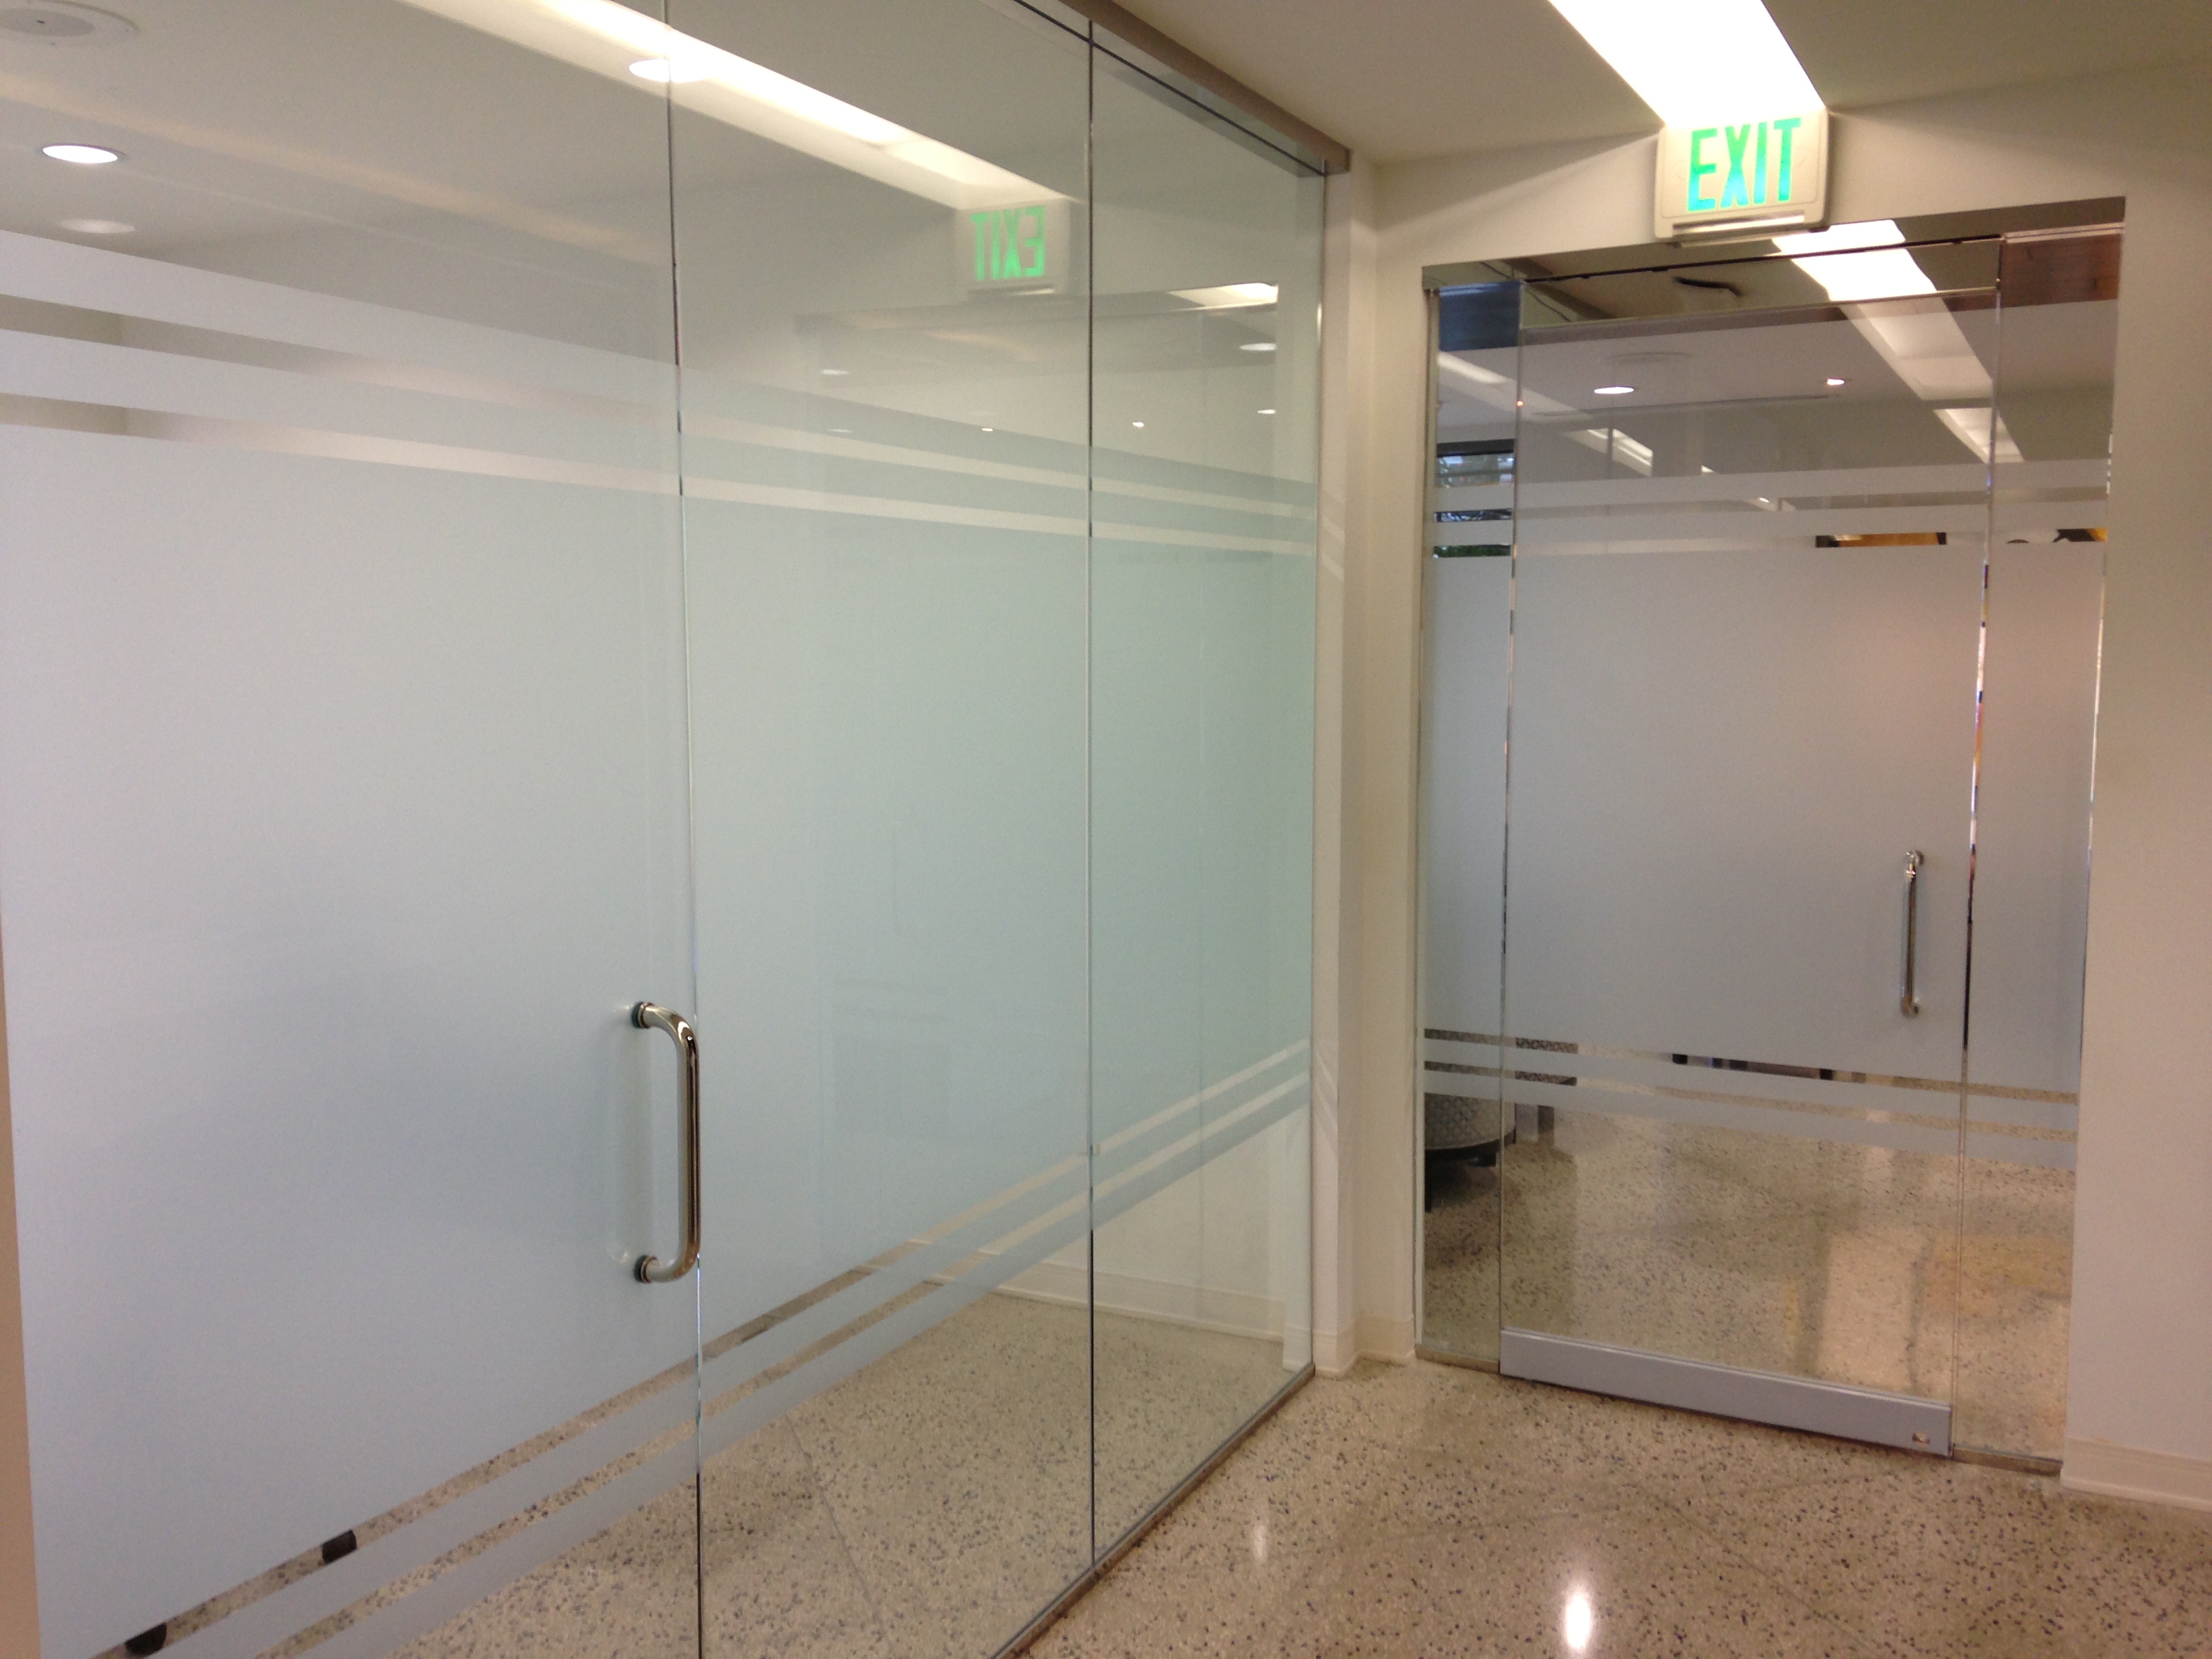 Frost Window Film Gives Contemporary Look To Offices In Dallas Tx Architectural Glass Solutions